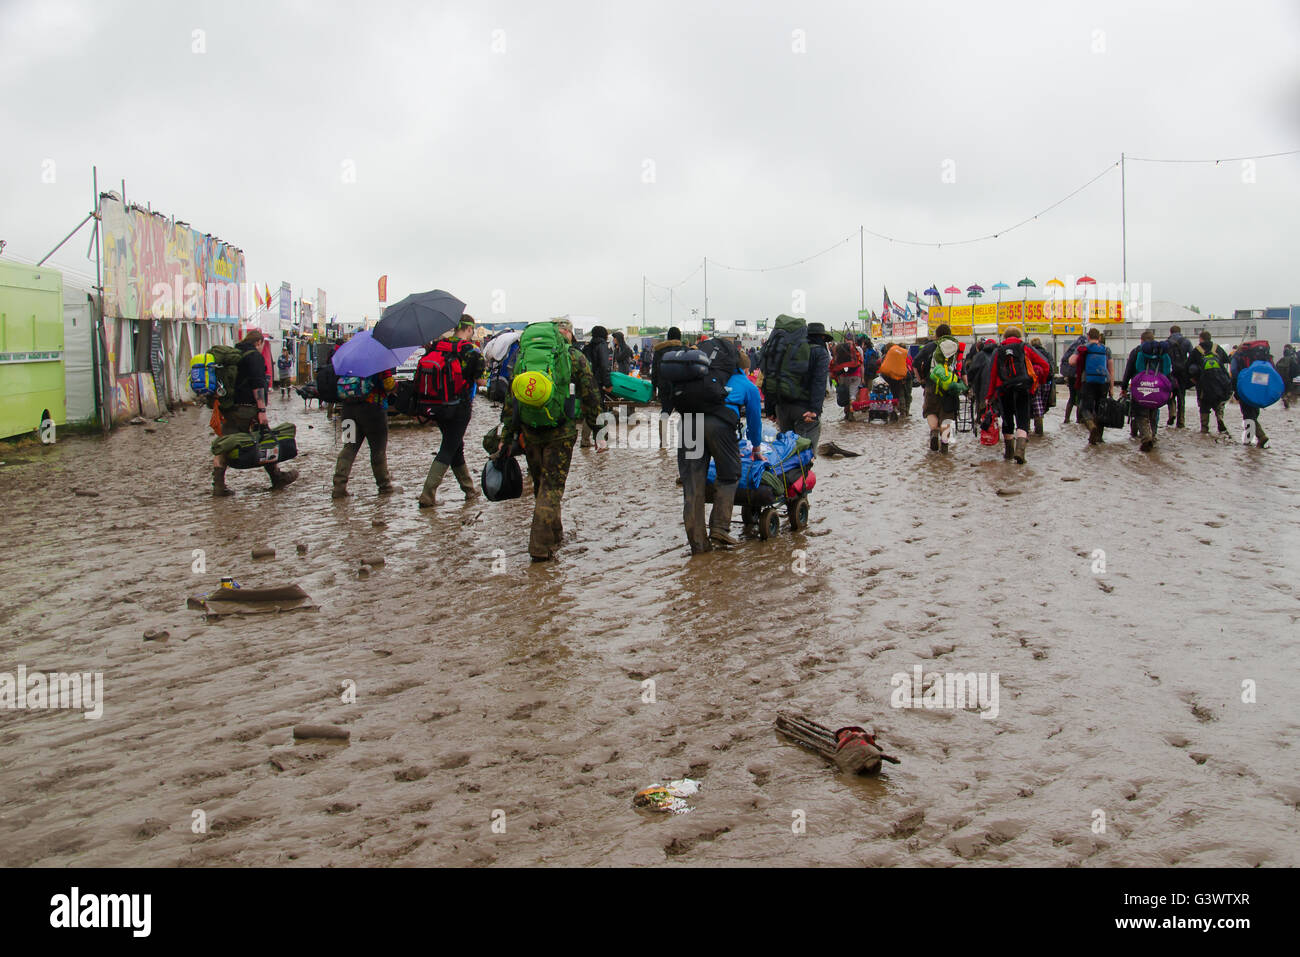 Muddy festival goers leaving download people with camping gear and suitcases trudging in the mud Stock Photo